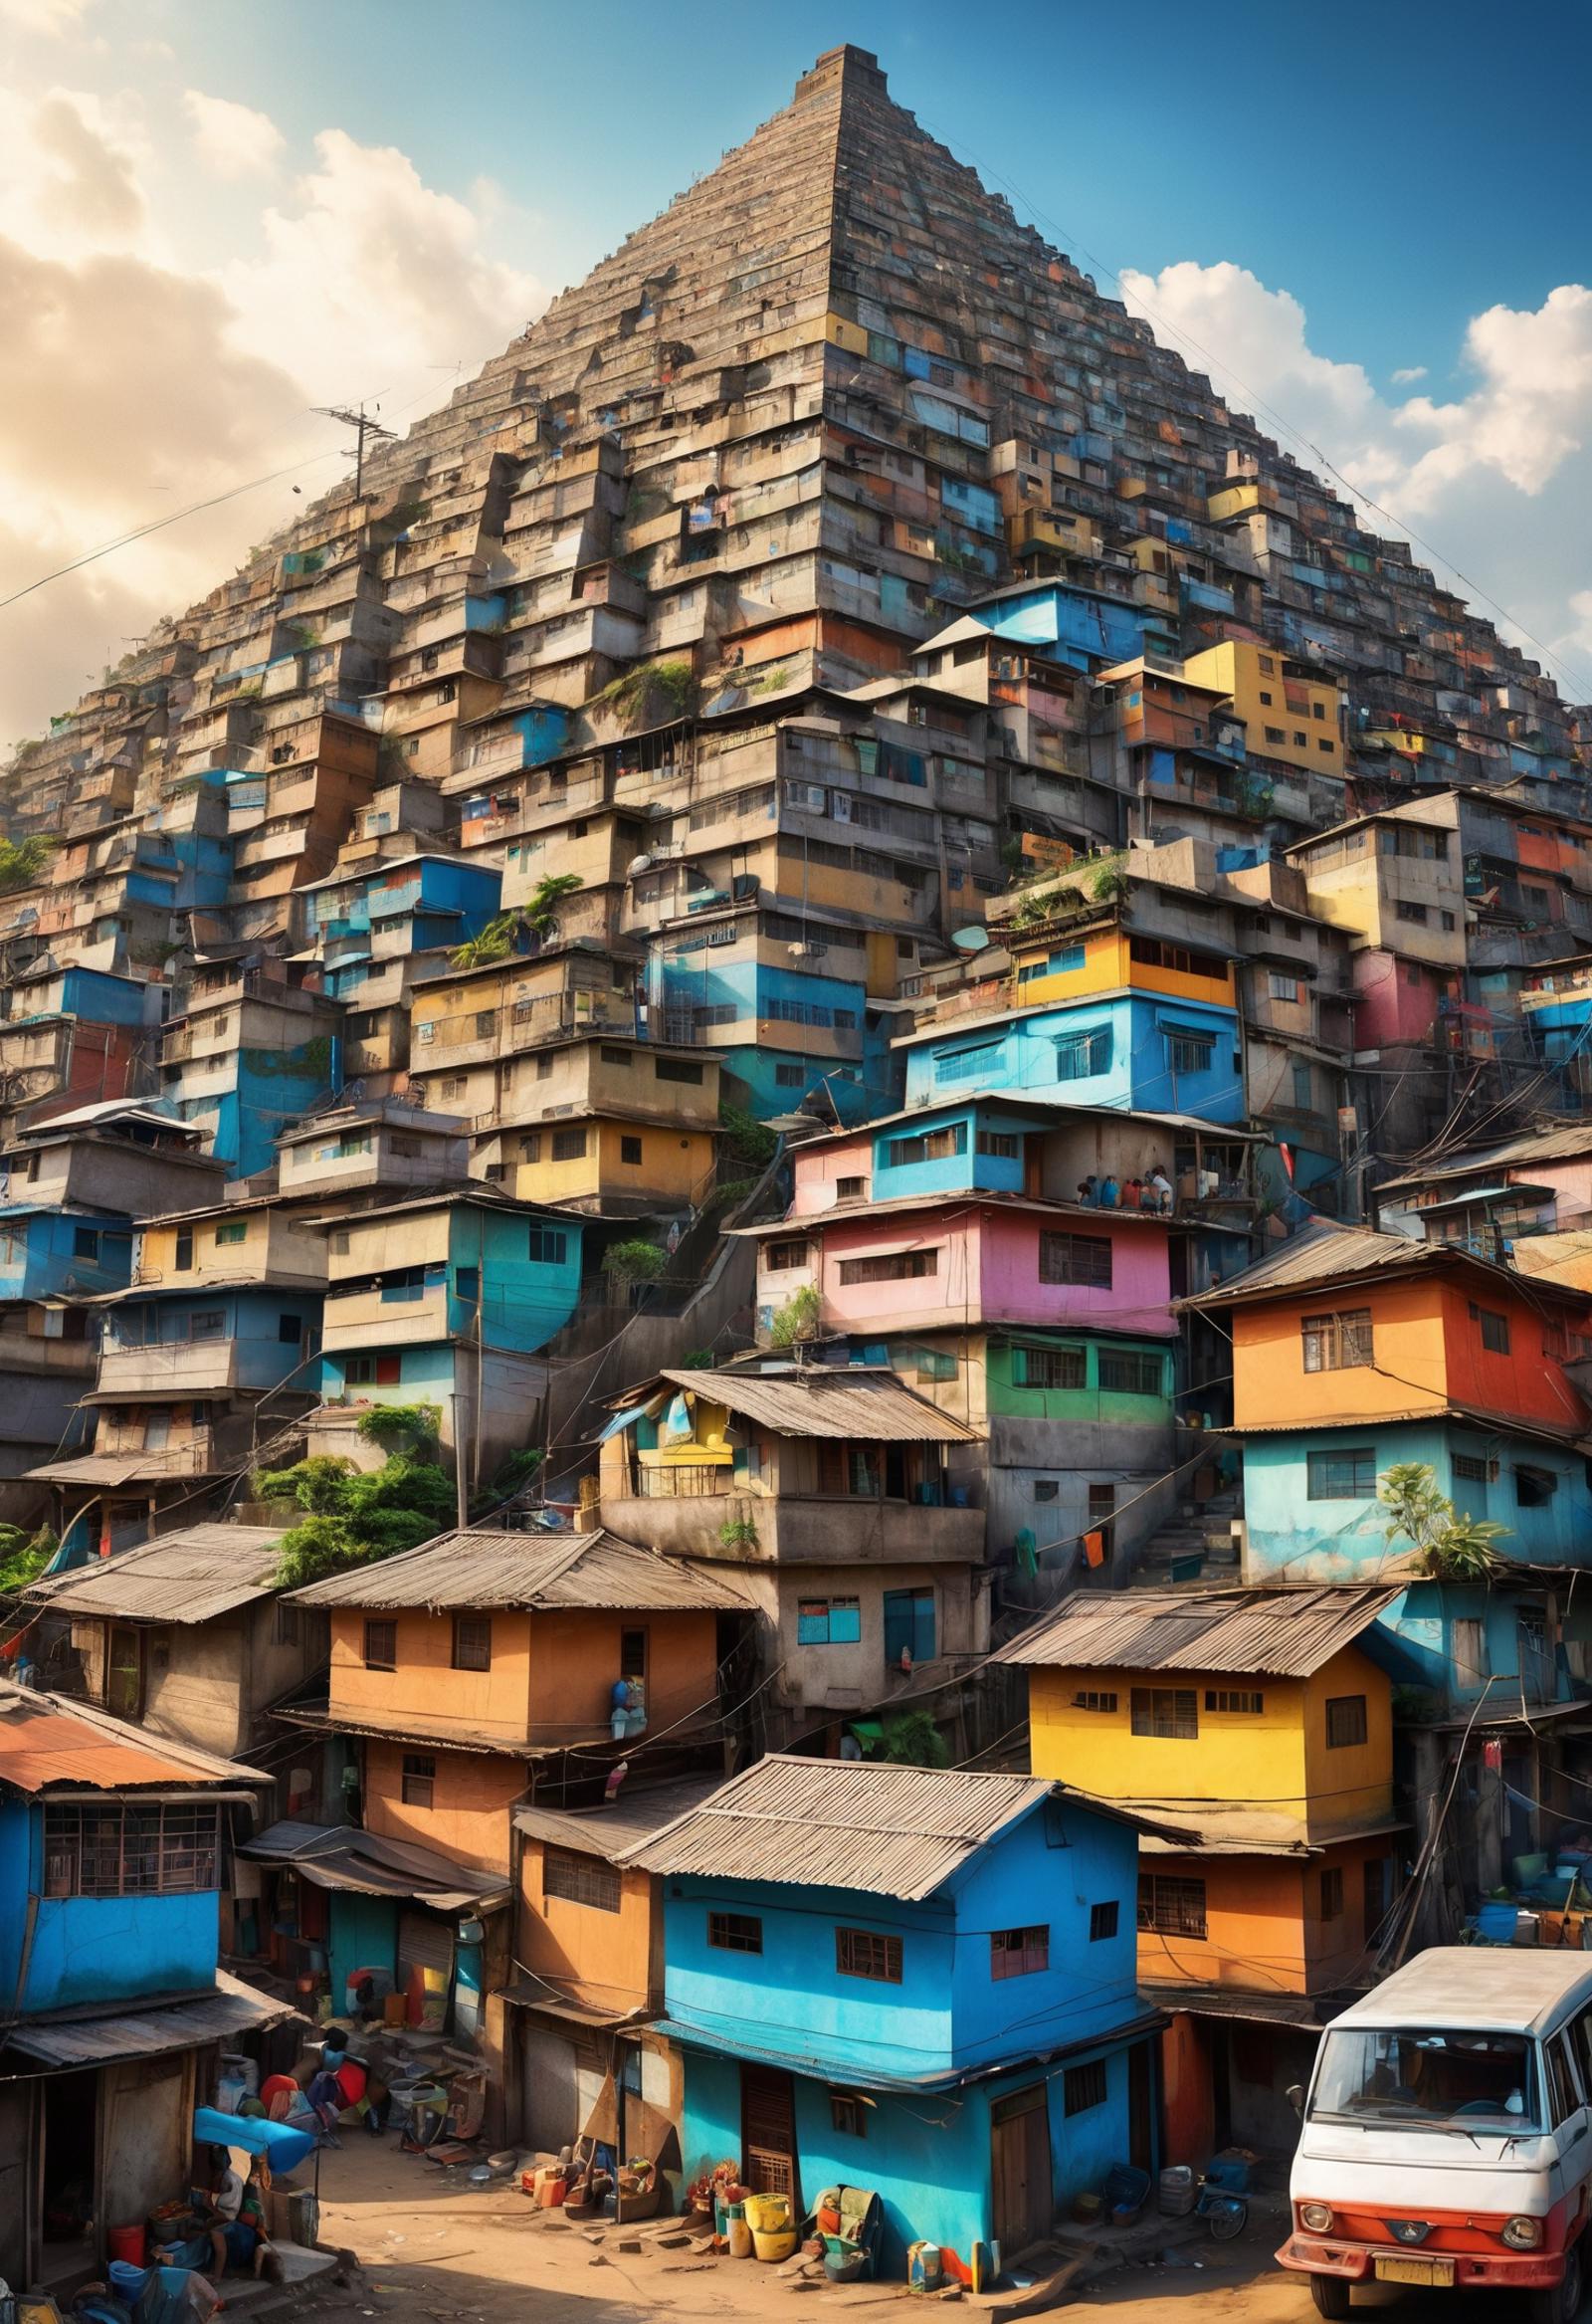 A large, colorful stack of houses with people on the roof.